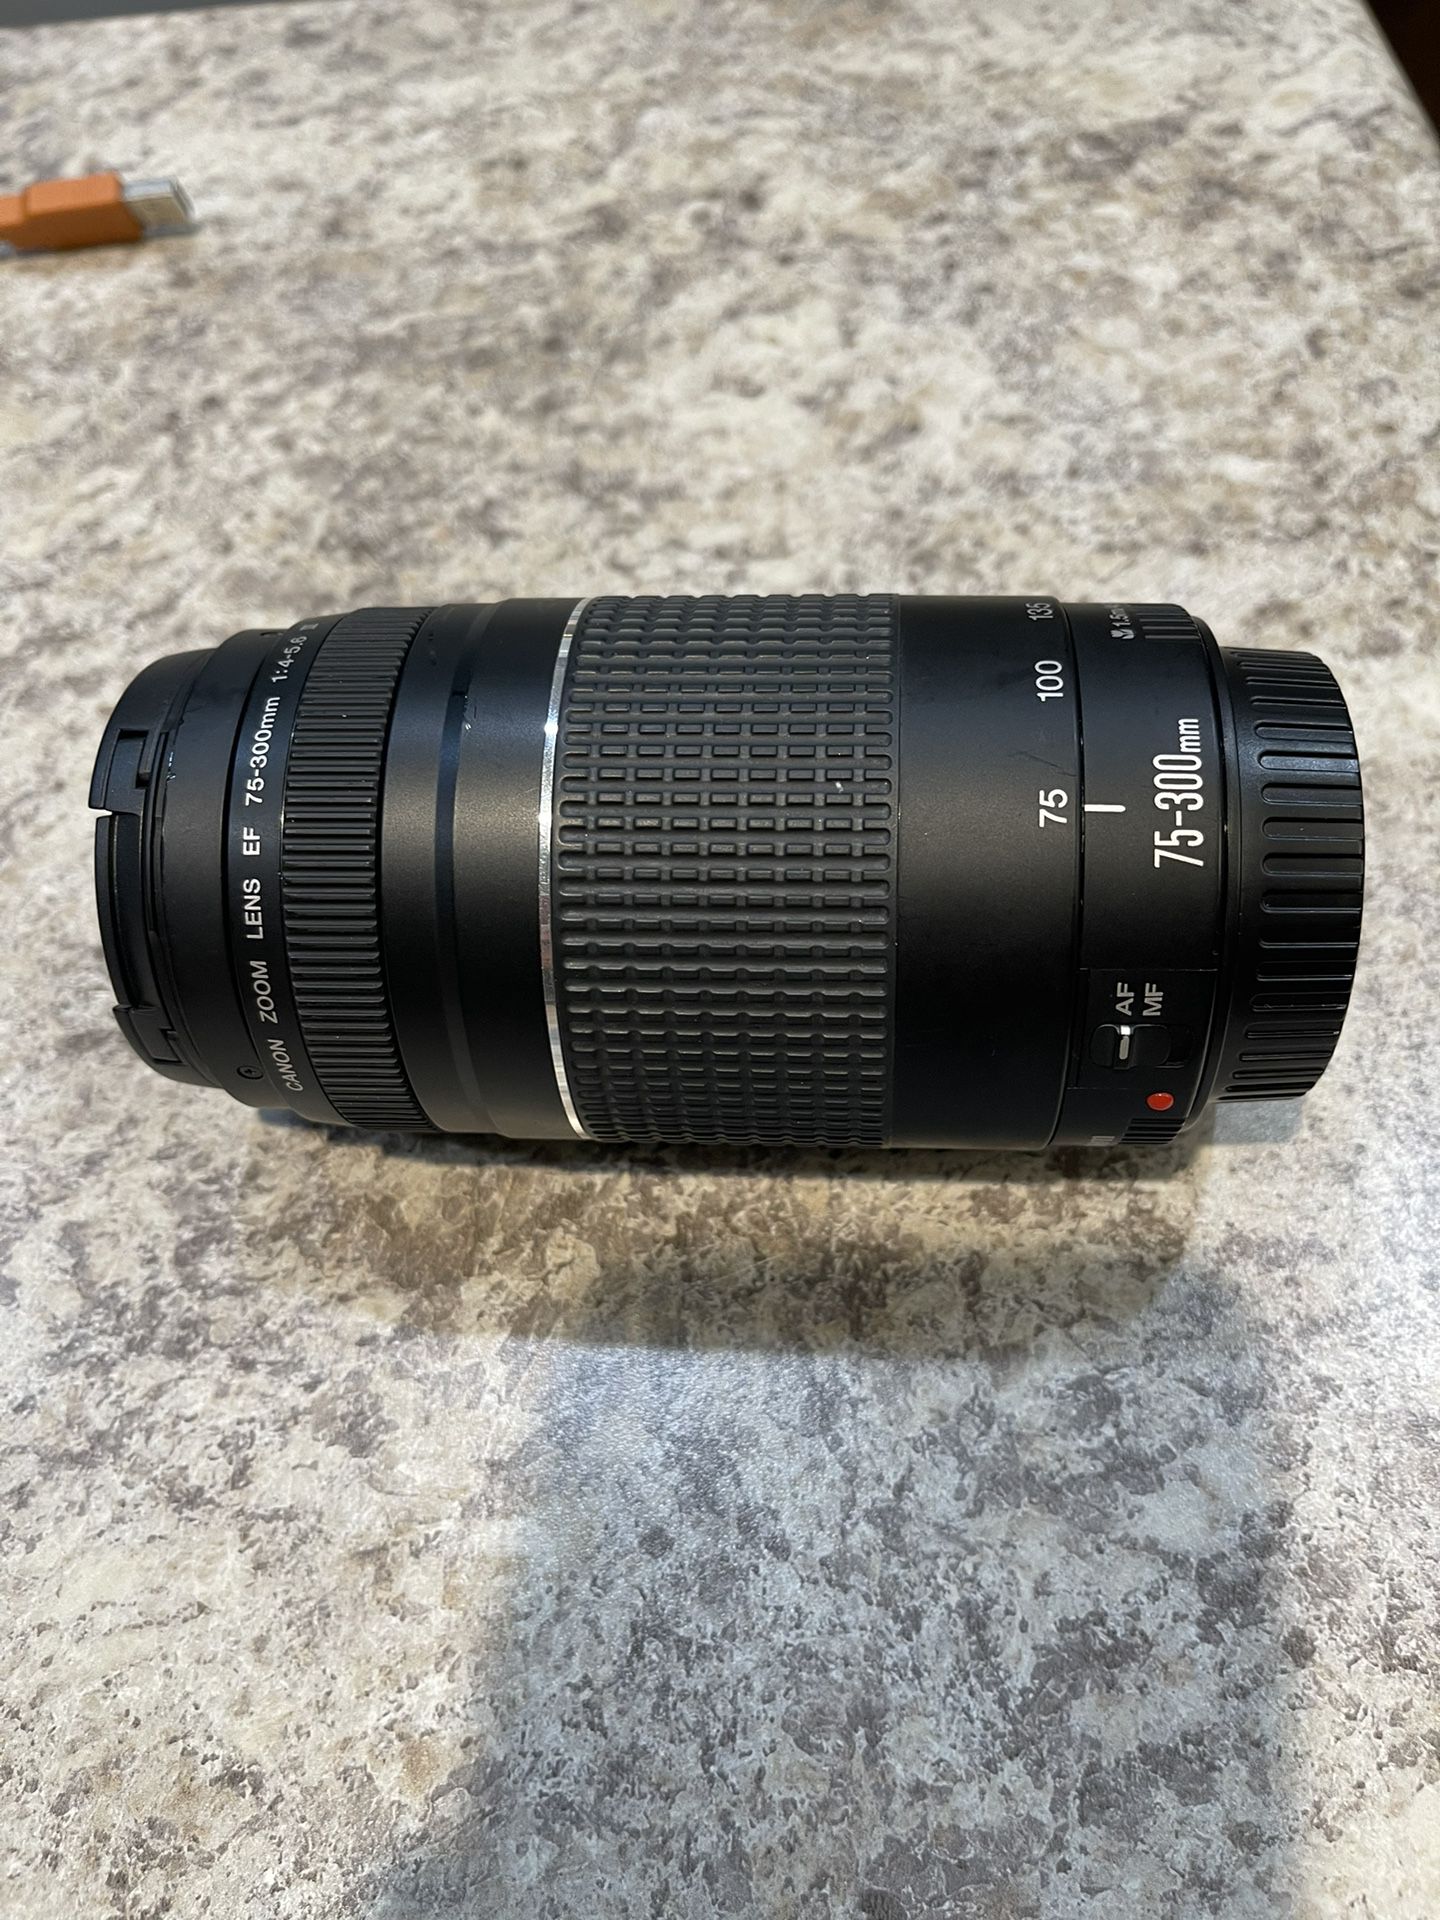 Canon Ef 75-300mm 